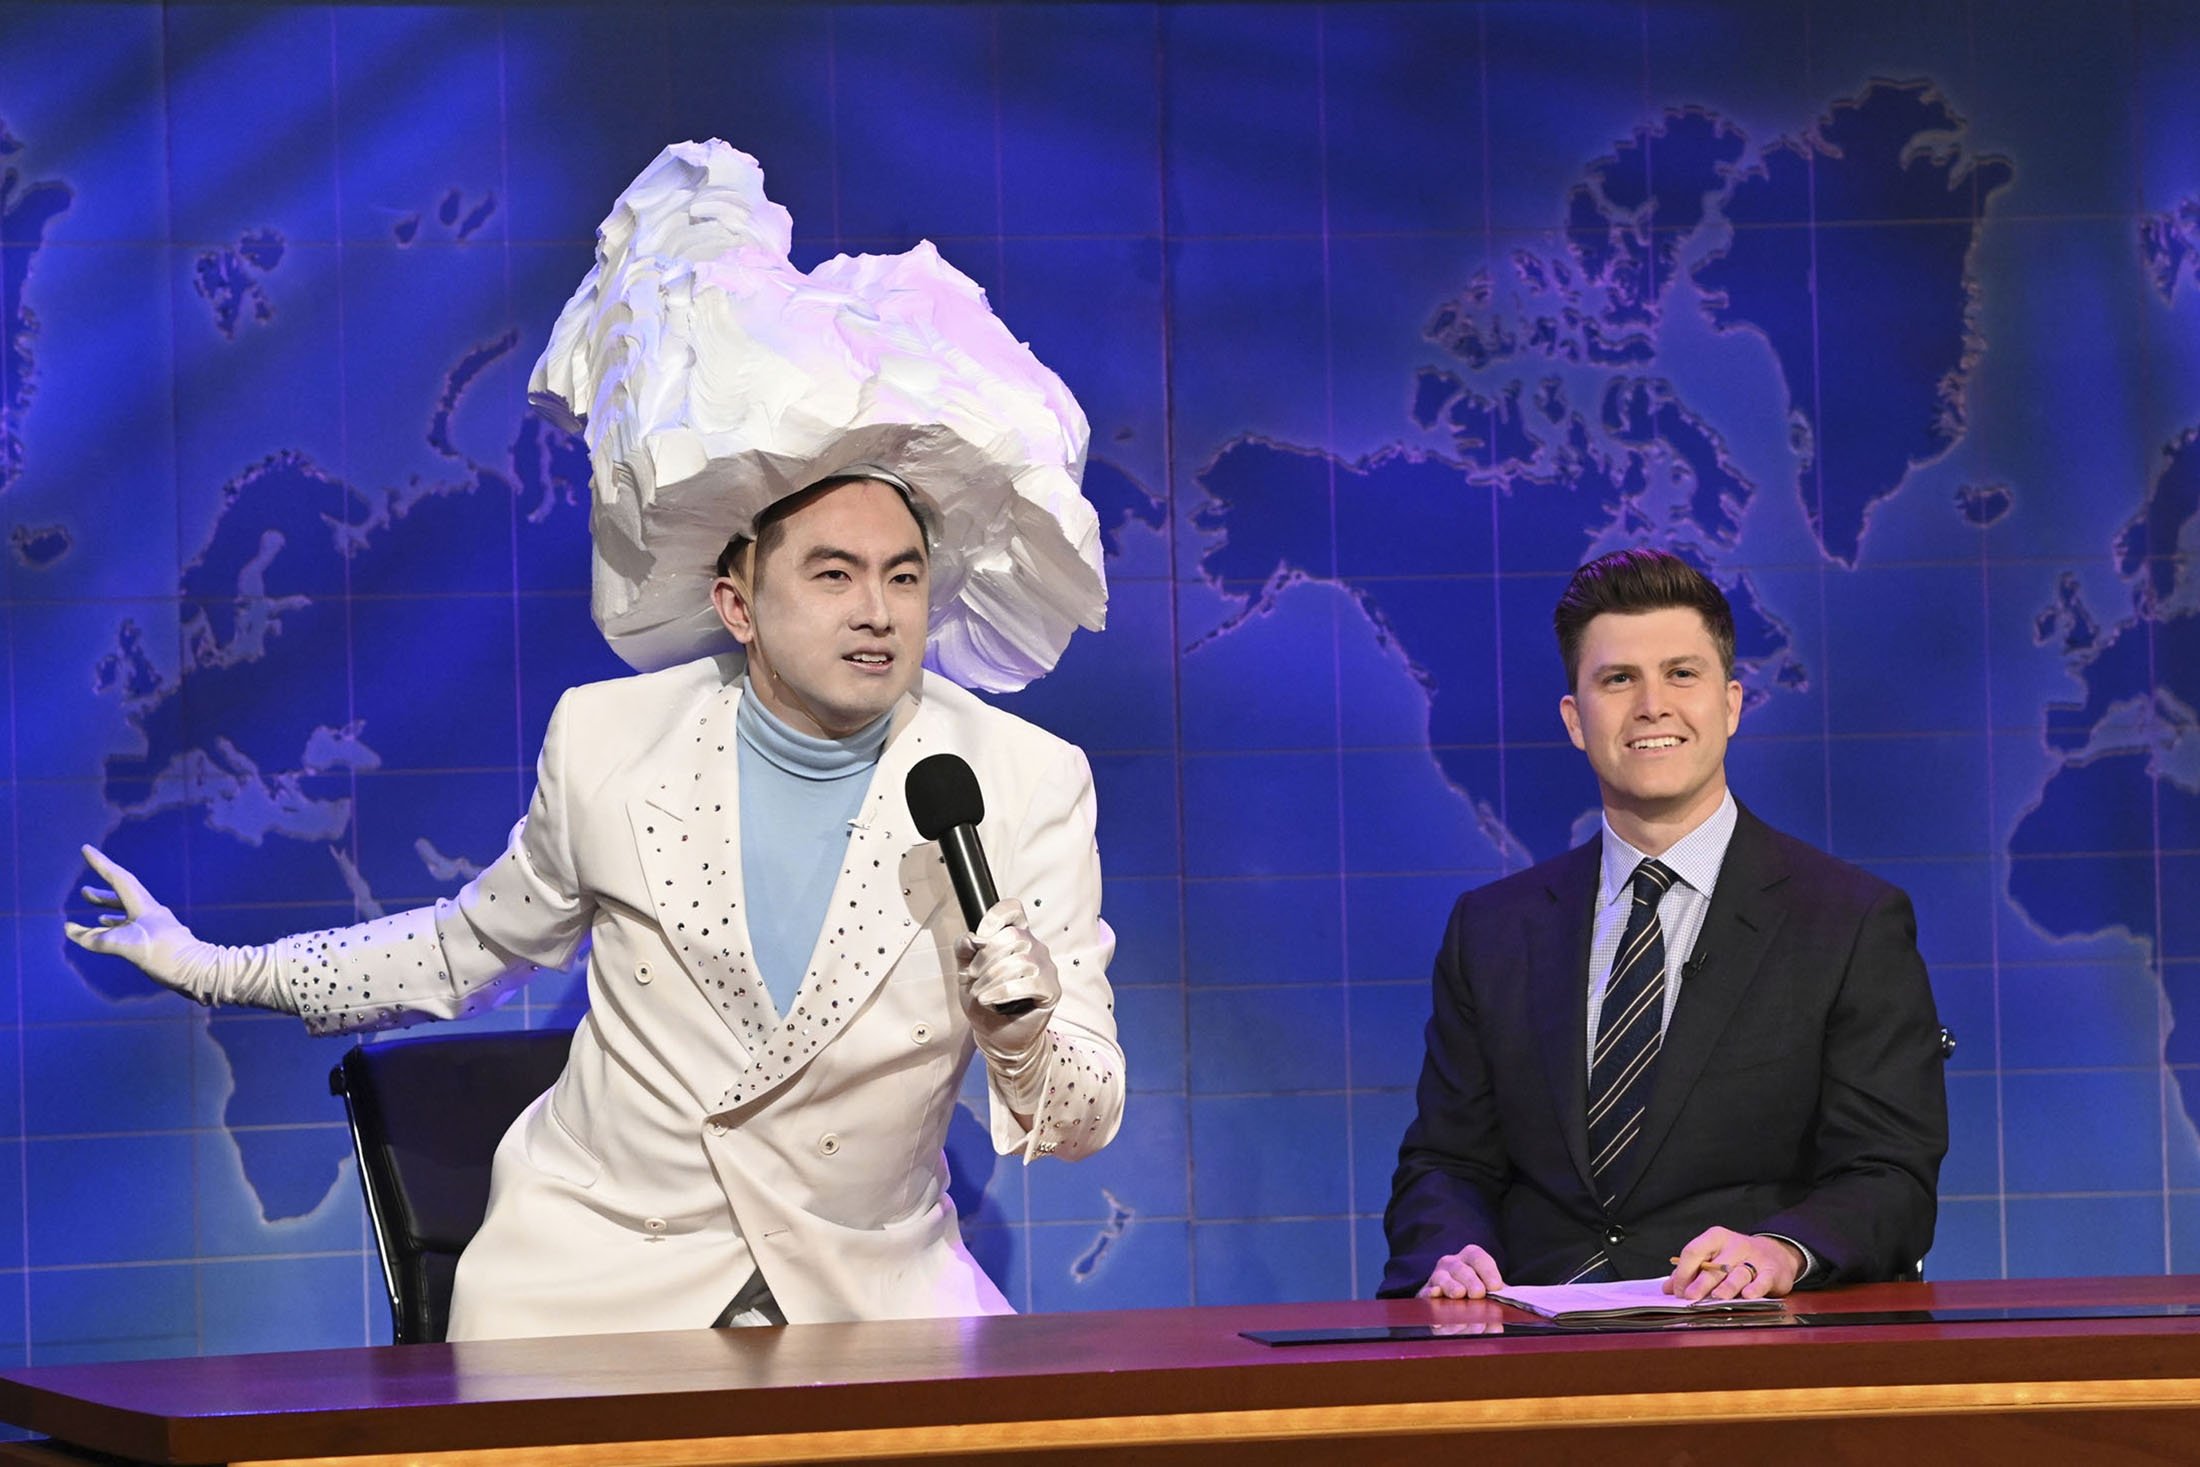 Bowen Yang (L) as the Iceberg that sank the Titanic, and anchor Colin Jost during Weekend Update on “Saturday Night Live,” in New York, U.S., April 10, 2021. (NBC via AP)